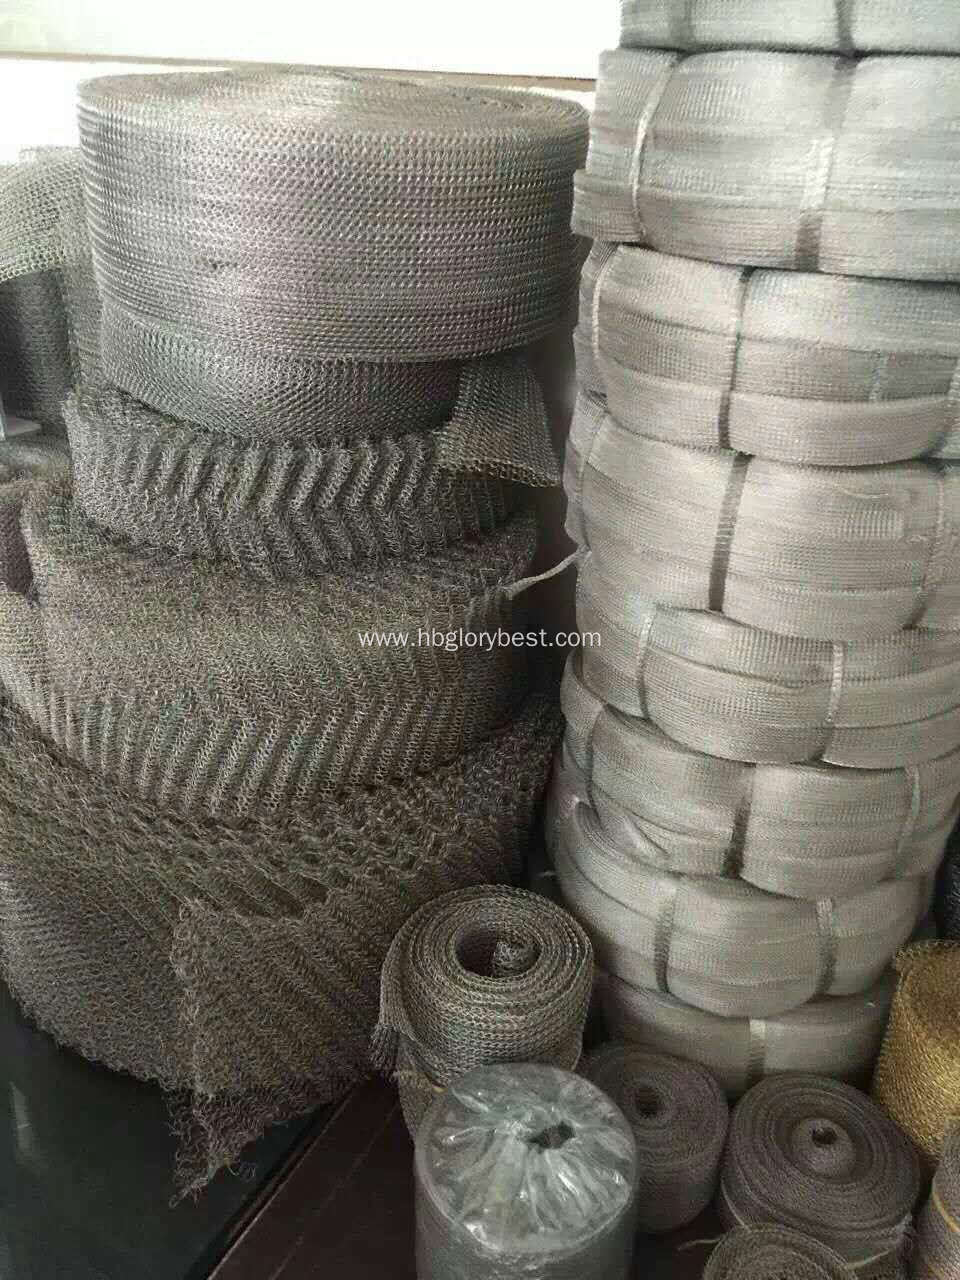 Stainless Steel Knitted Wire Mesh for Distillation Packing